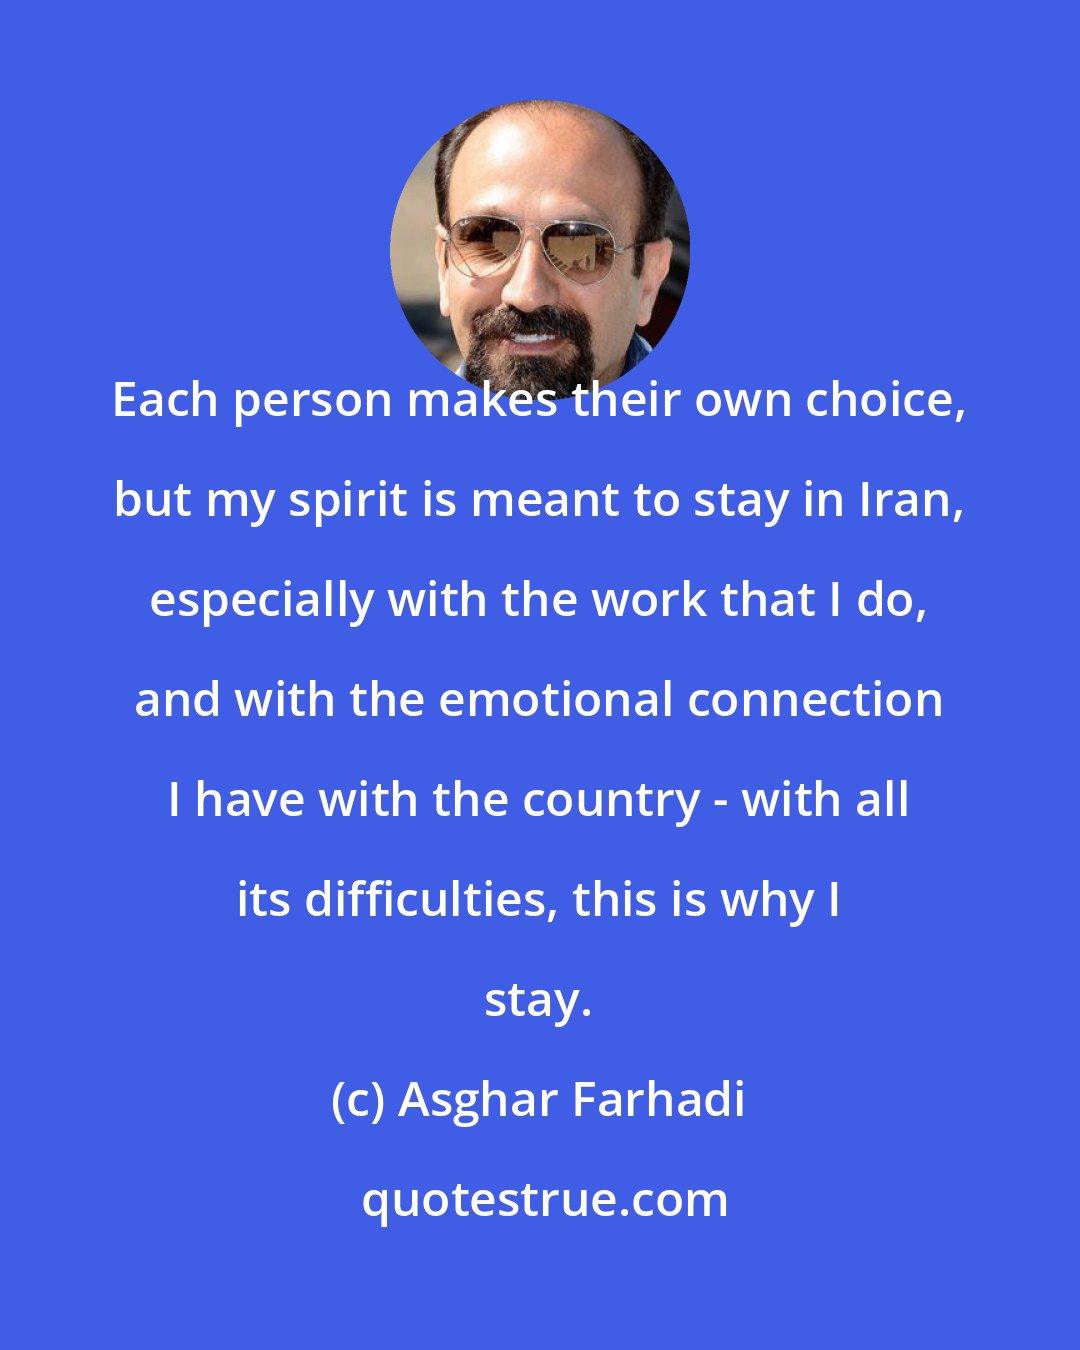 Asghar Farhadi: Each person makes their own choice, but my spirit is meant to stay in Iran, especially with the work that I do, and with the emotional connection I have with the country - with all its difficulties, this is why I stay.